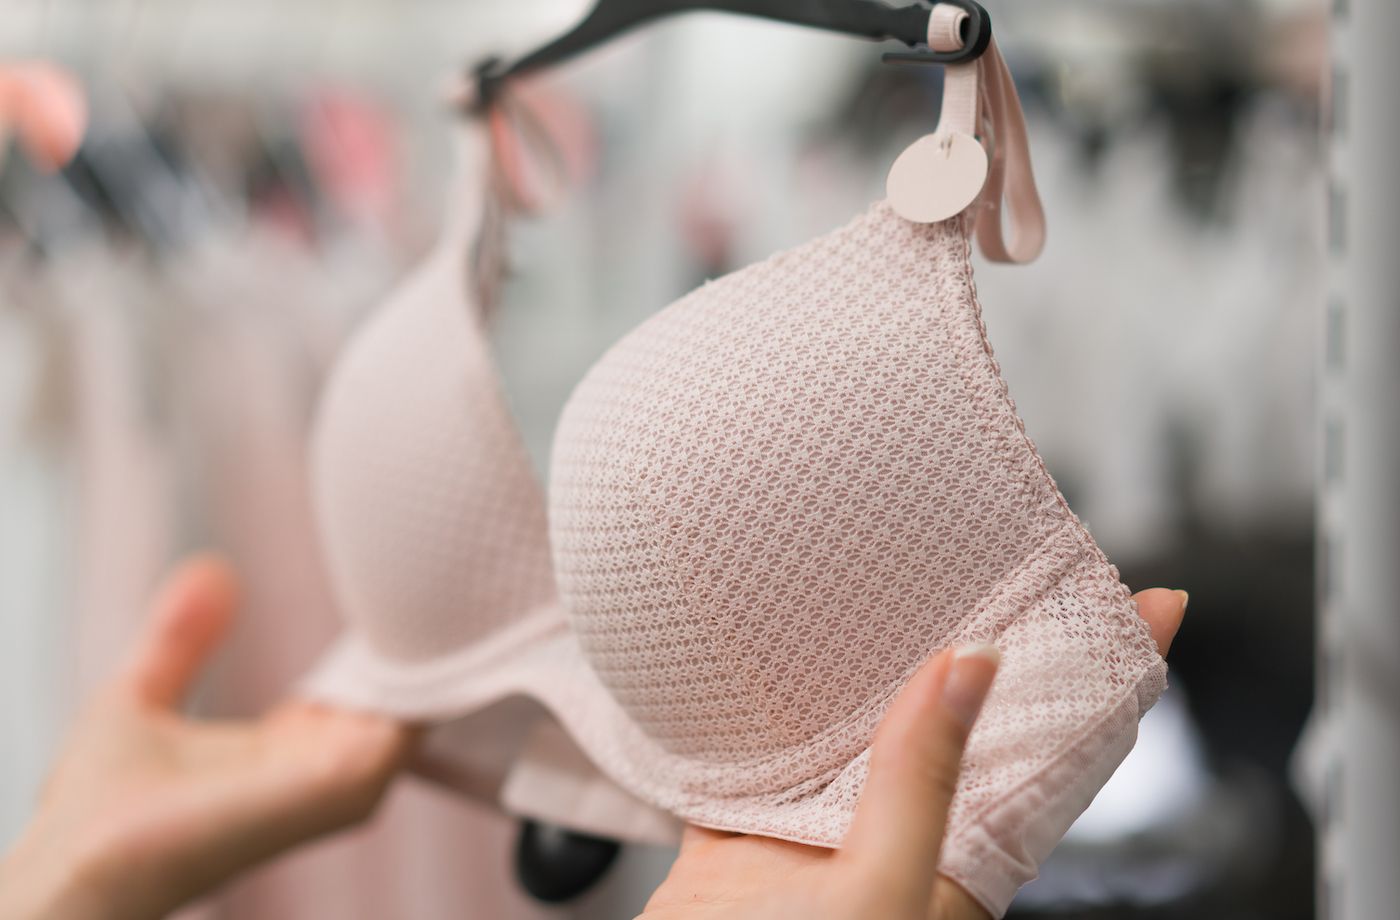 Why Don't They Sew the Bra Pads into the Bras? – HSIA